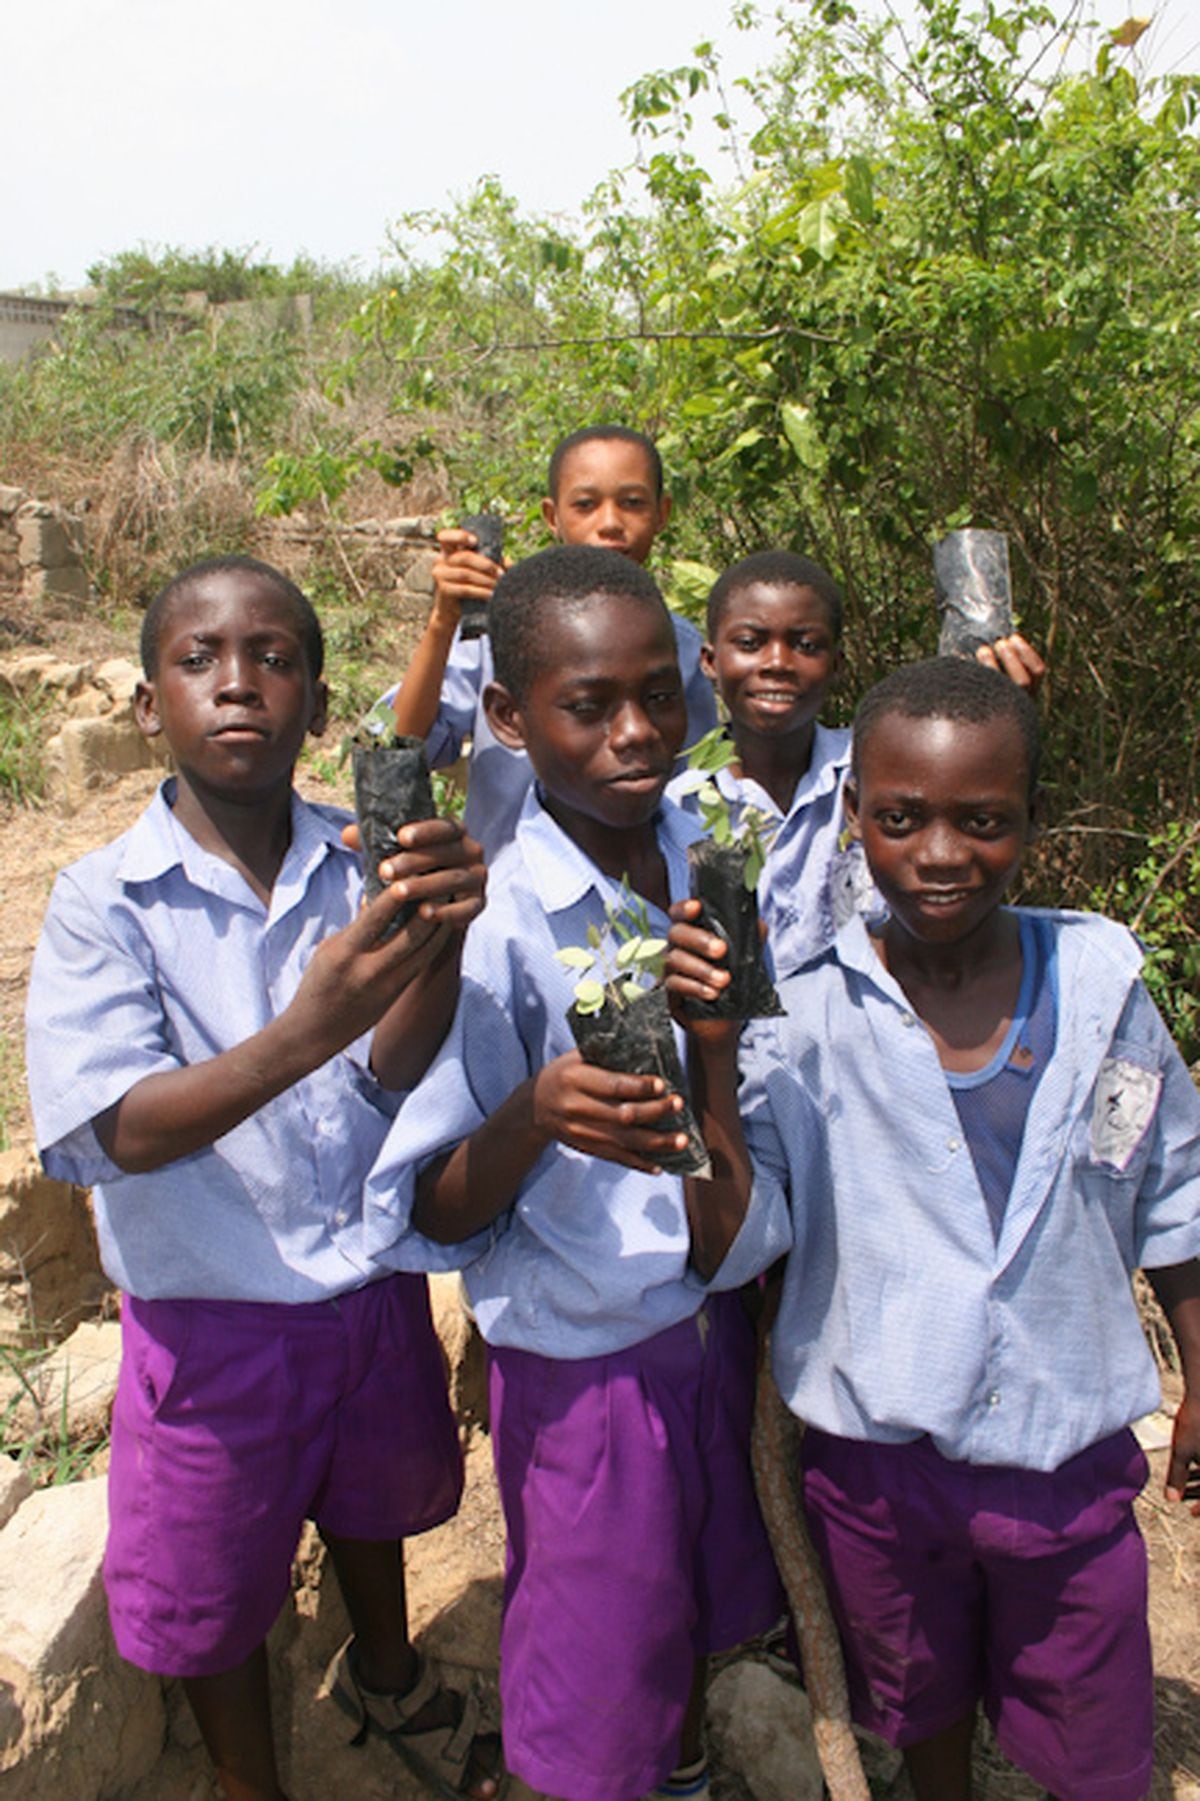 The Tree Appeal aims to support school communities throughout the UK, as well as forest regeneration projects in Kenya